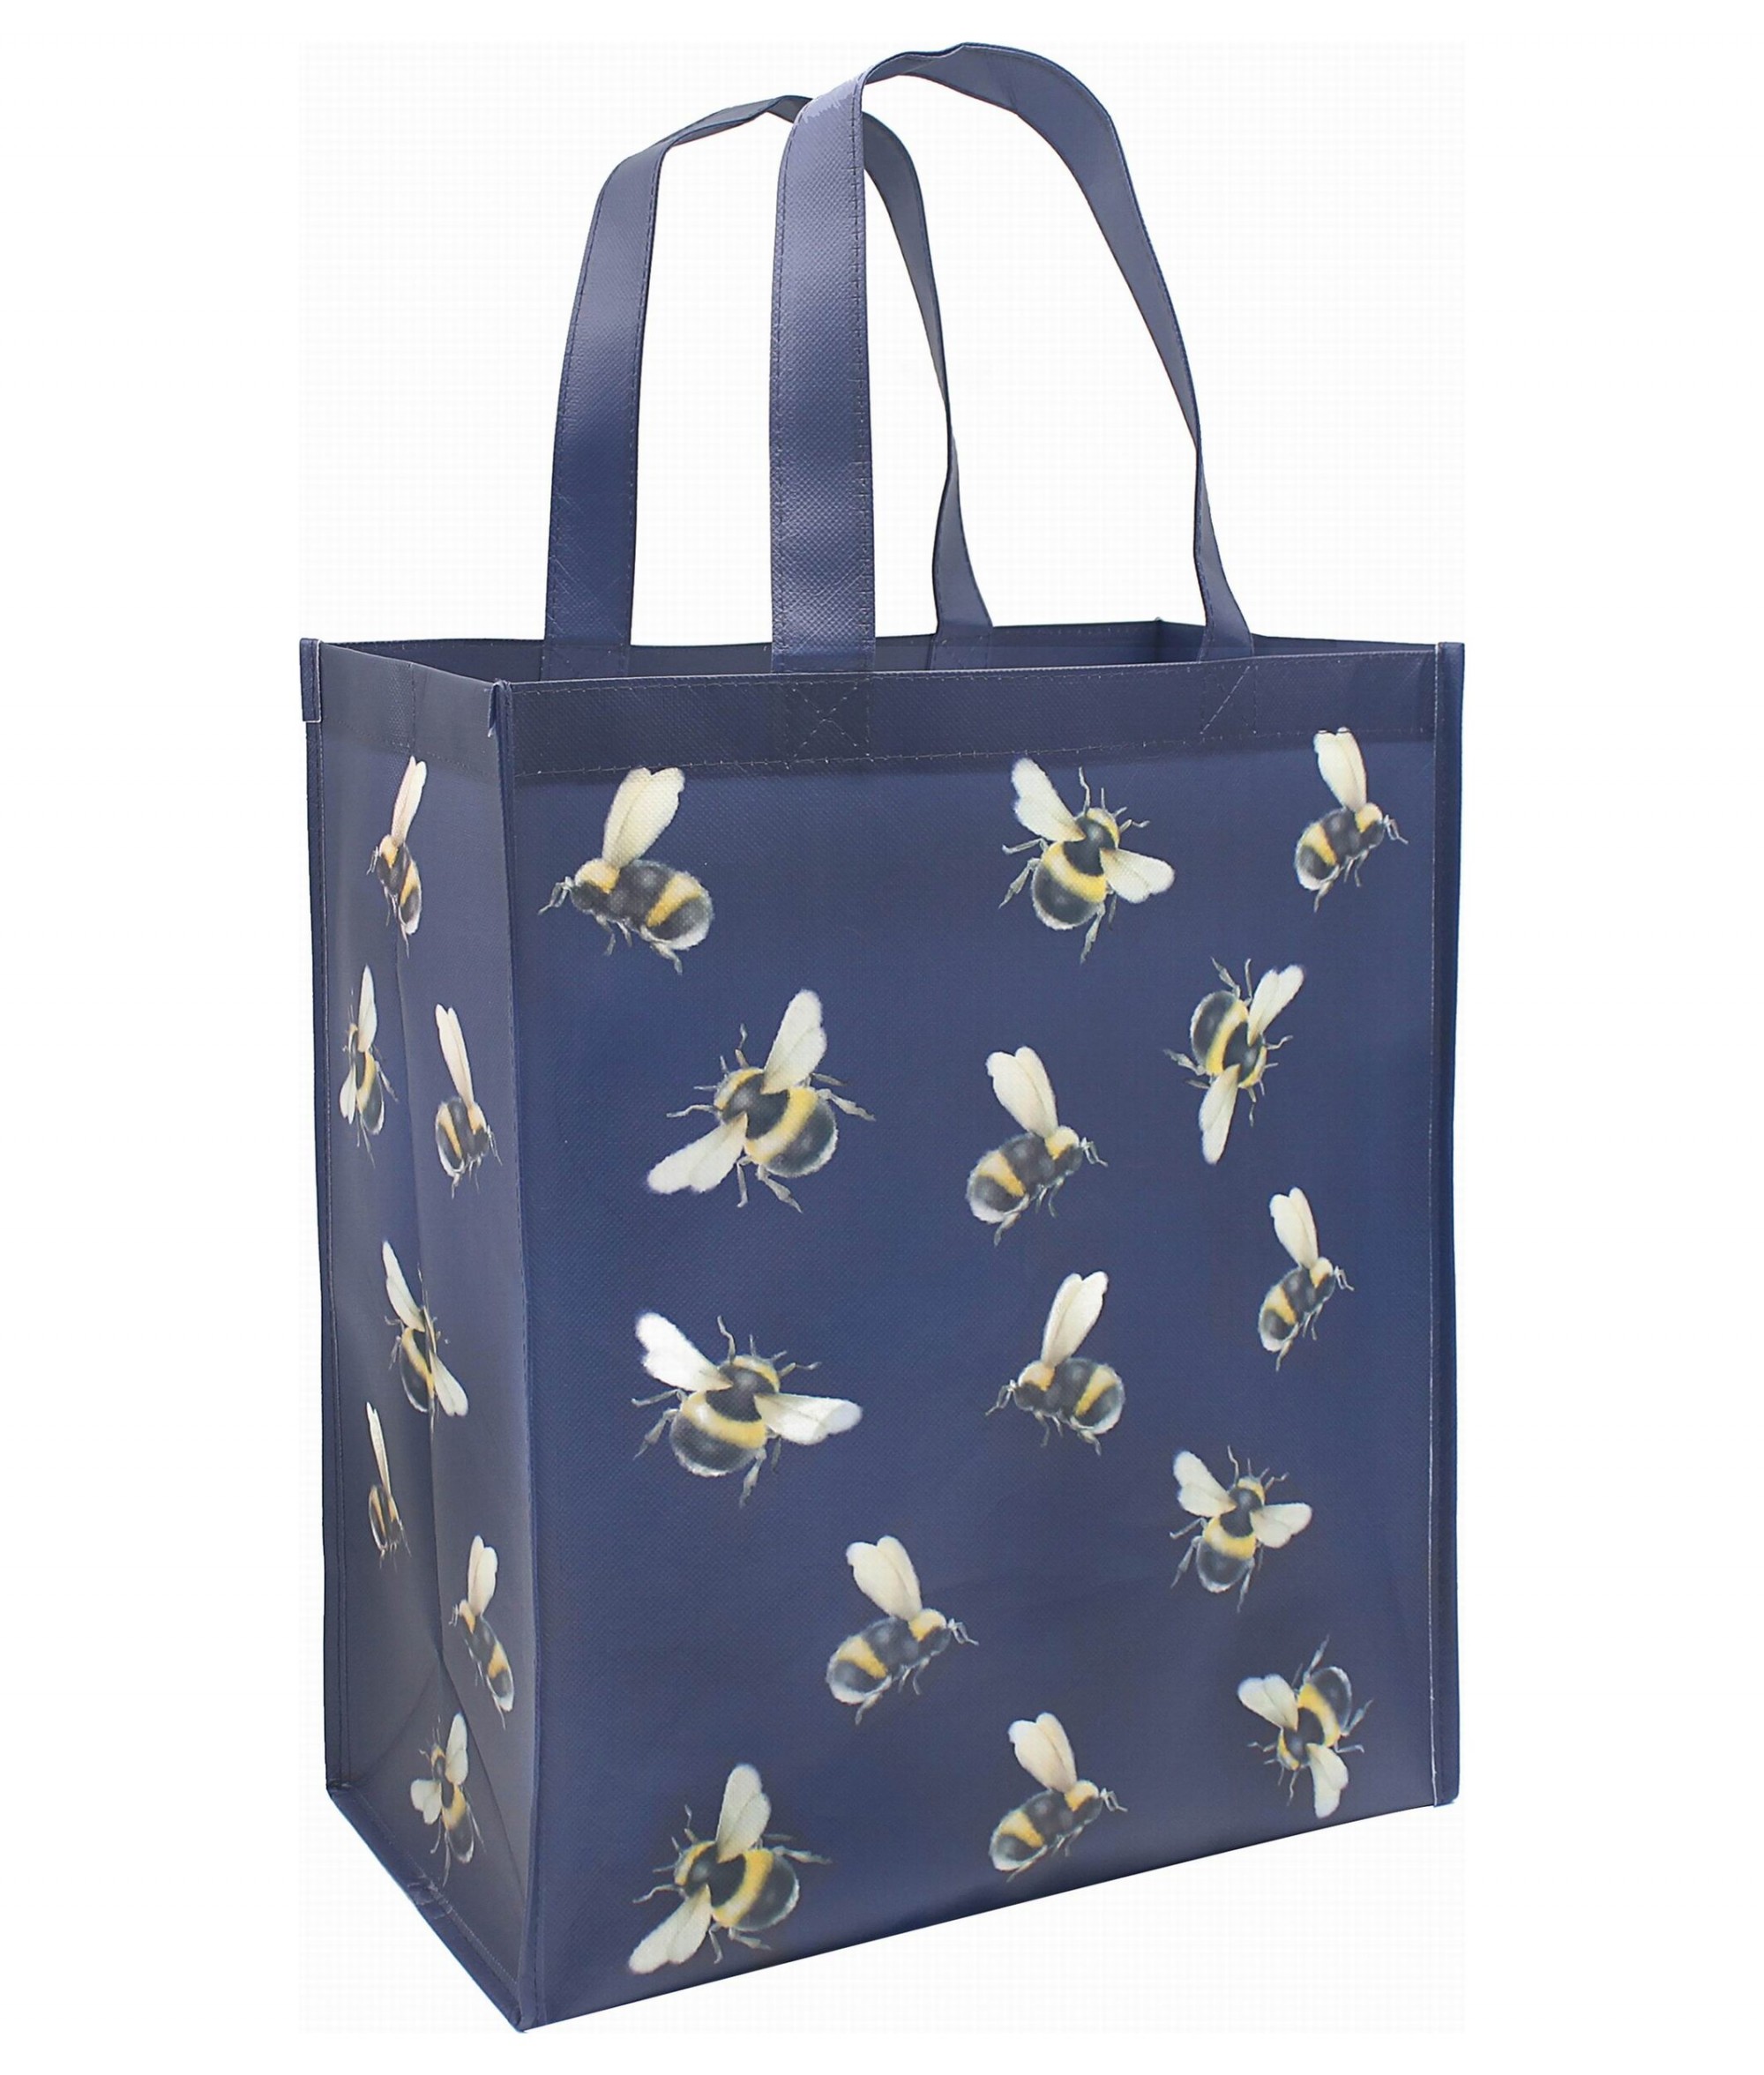 Bees Tote Shopping Bag | Cancer Research UK Online Shop